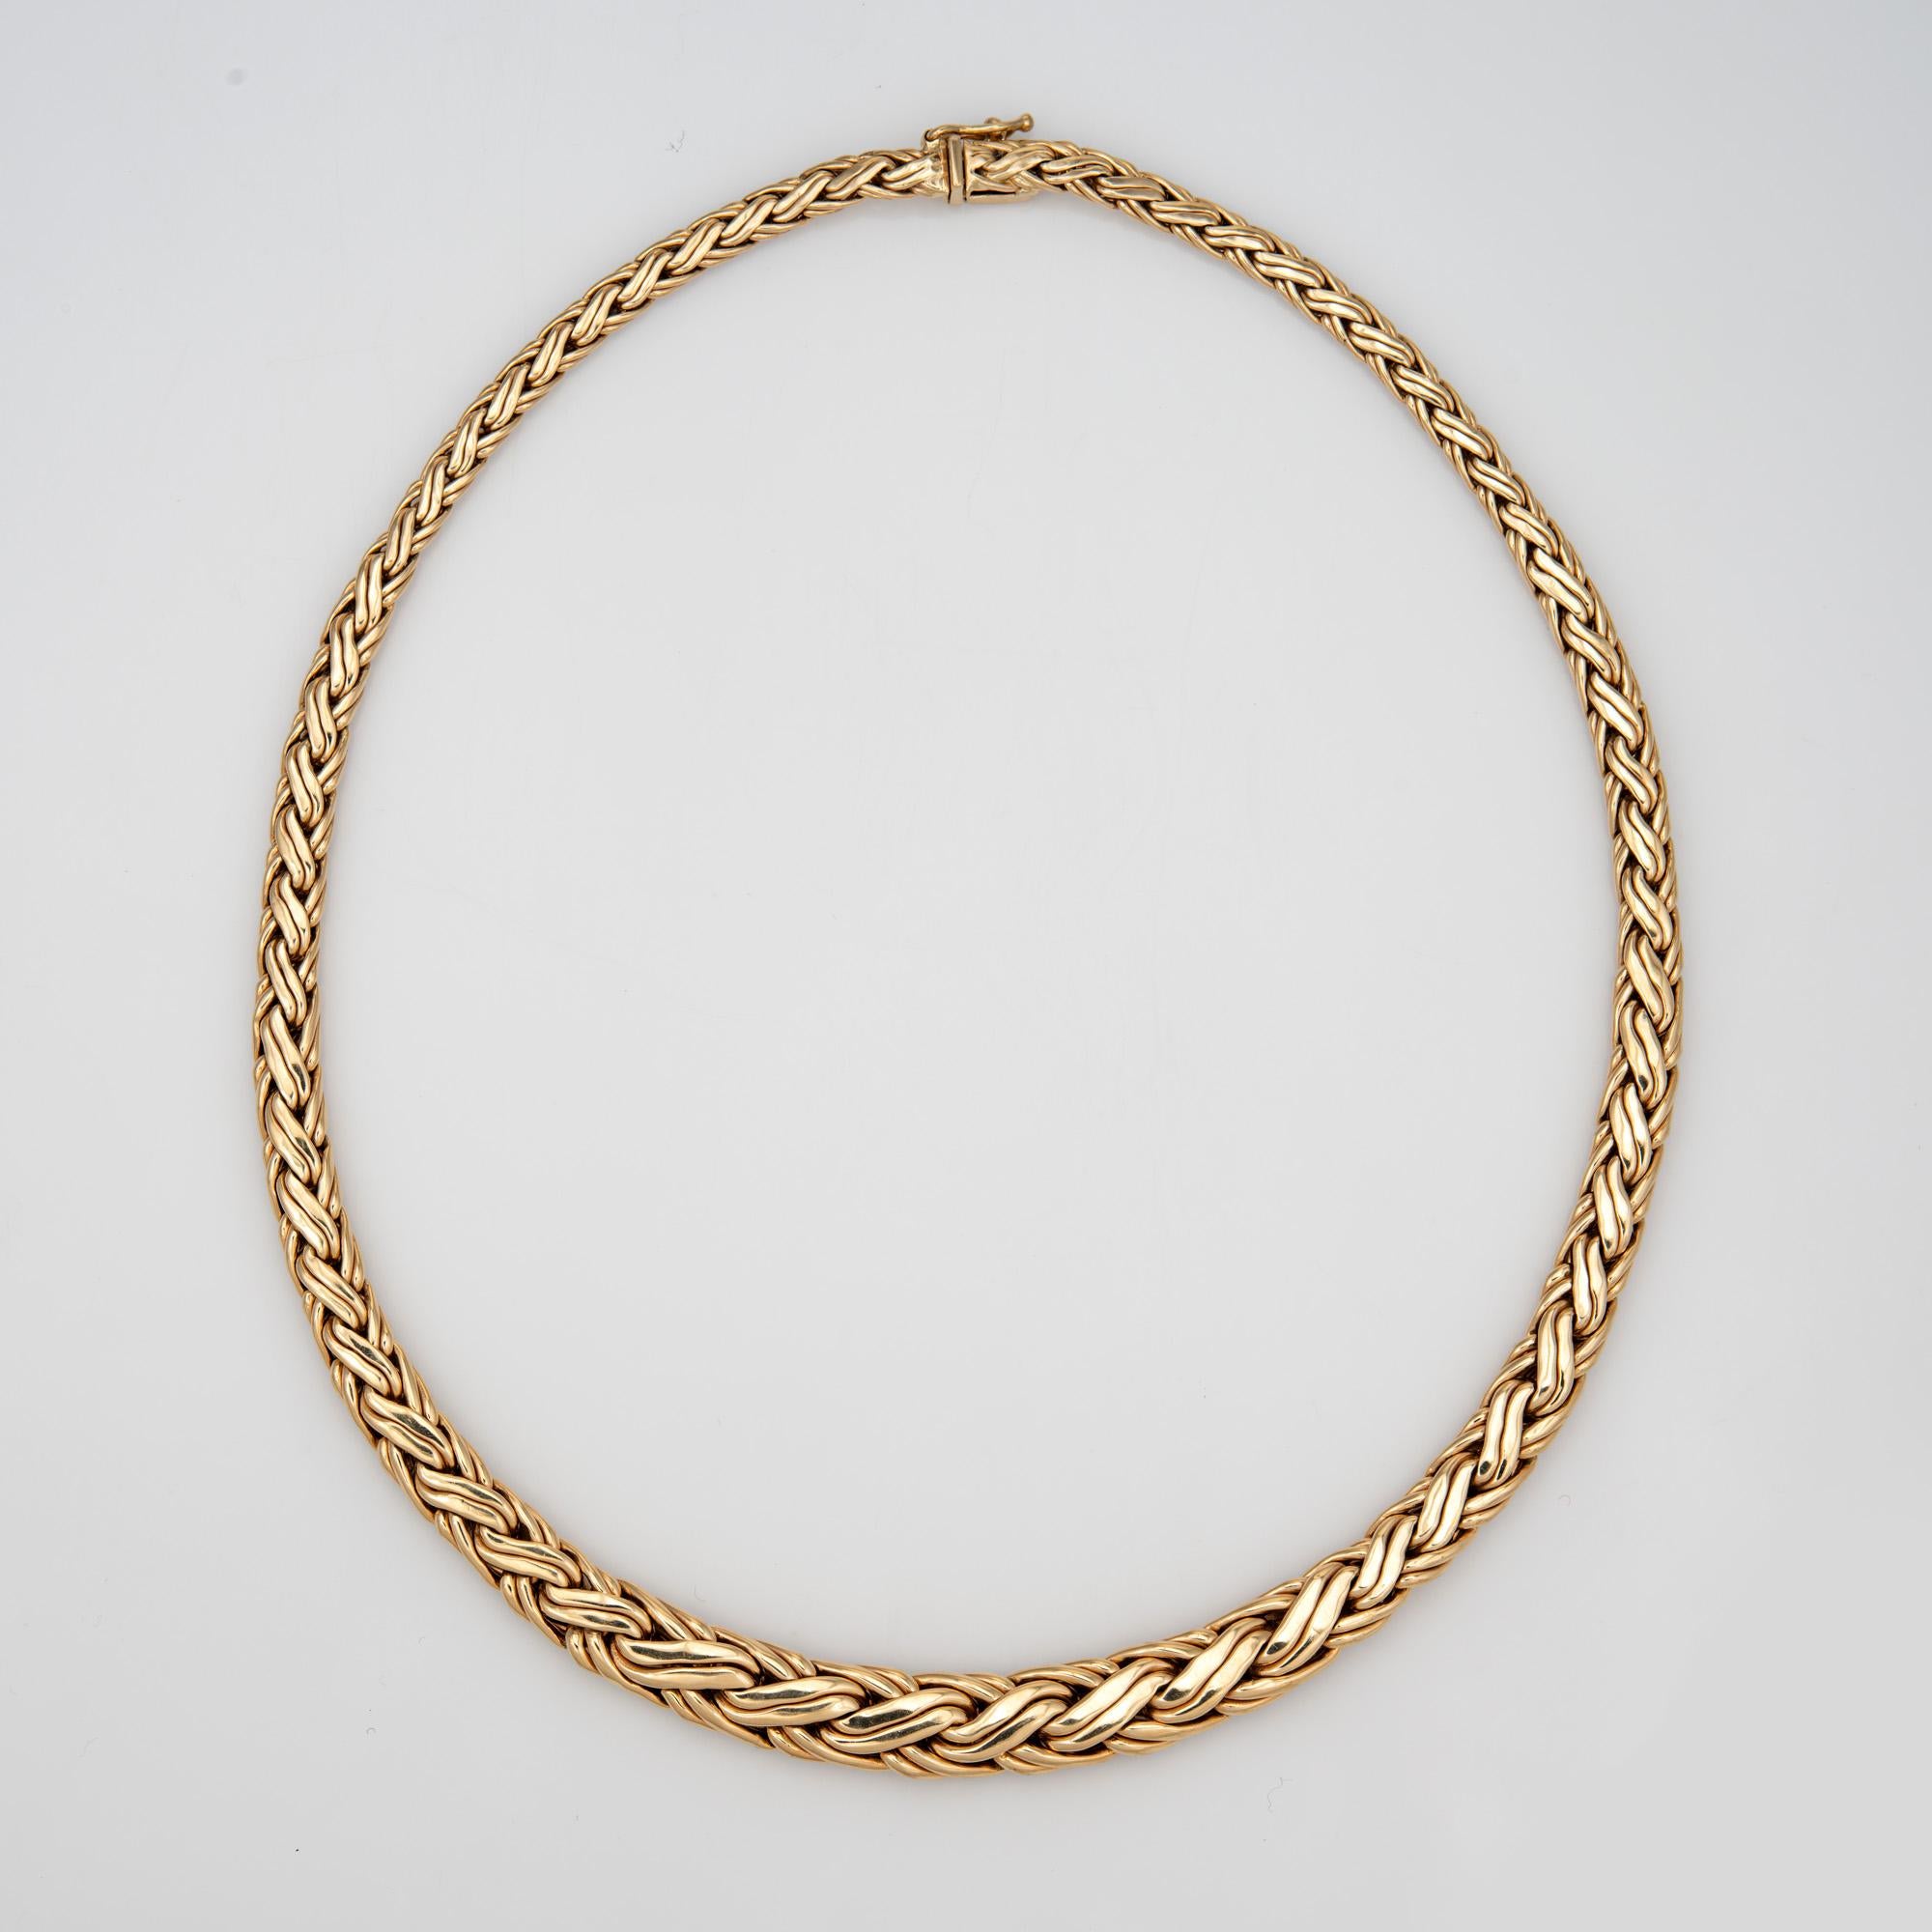 Stylish and finely detailed pre-owned Tiffany & Co choker necklace, crafted in 14k yellow.  

The necklace features an interwoven fancy link weave pattern that graduates from 4.5mm to 9mm wide. Measuring 16 inches in length the necklace sits nicely